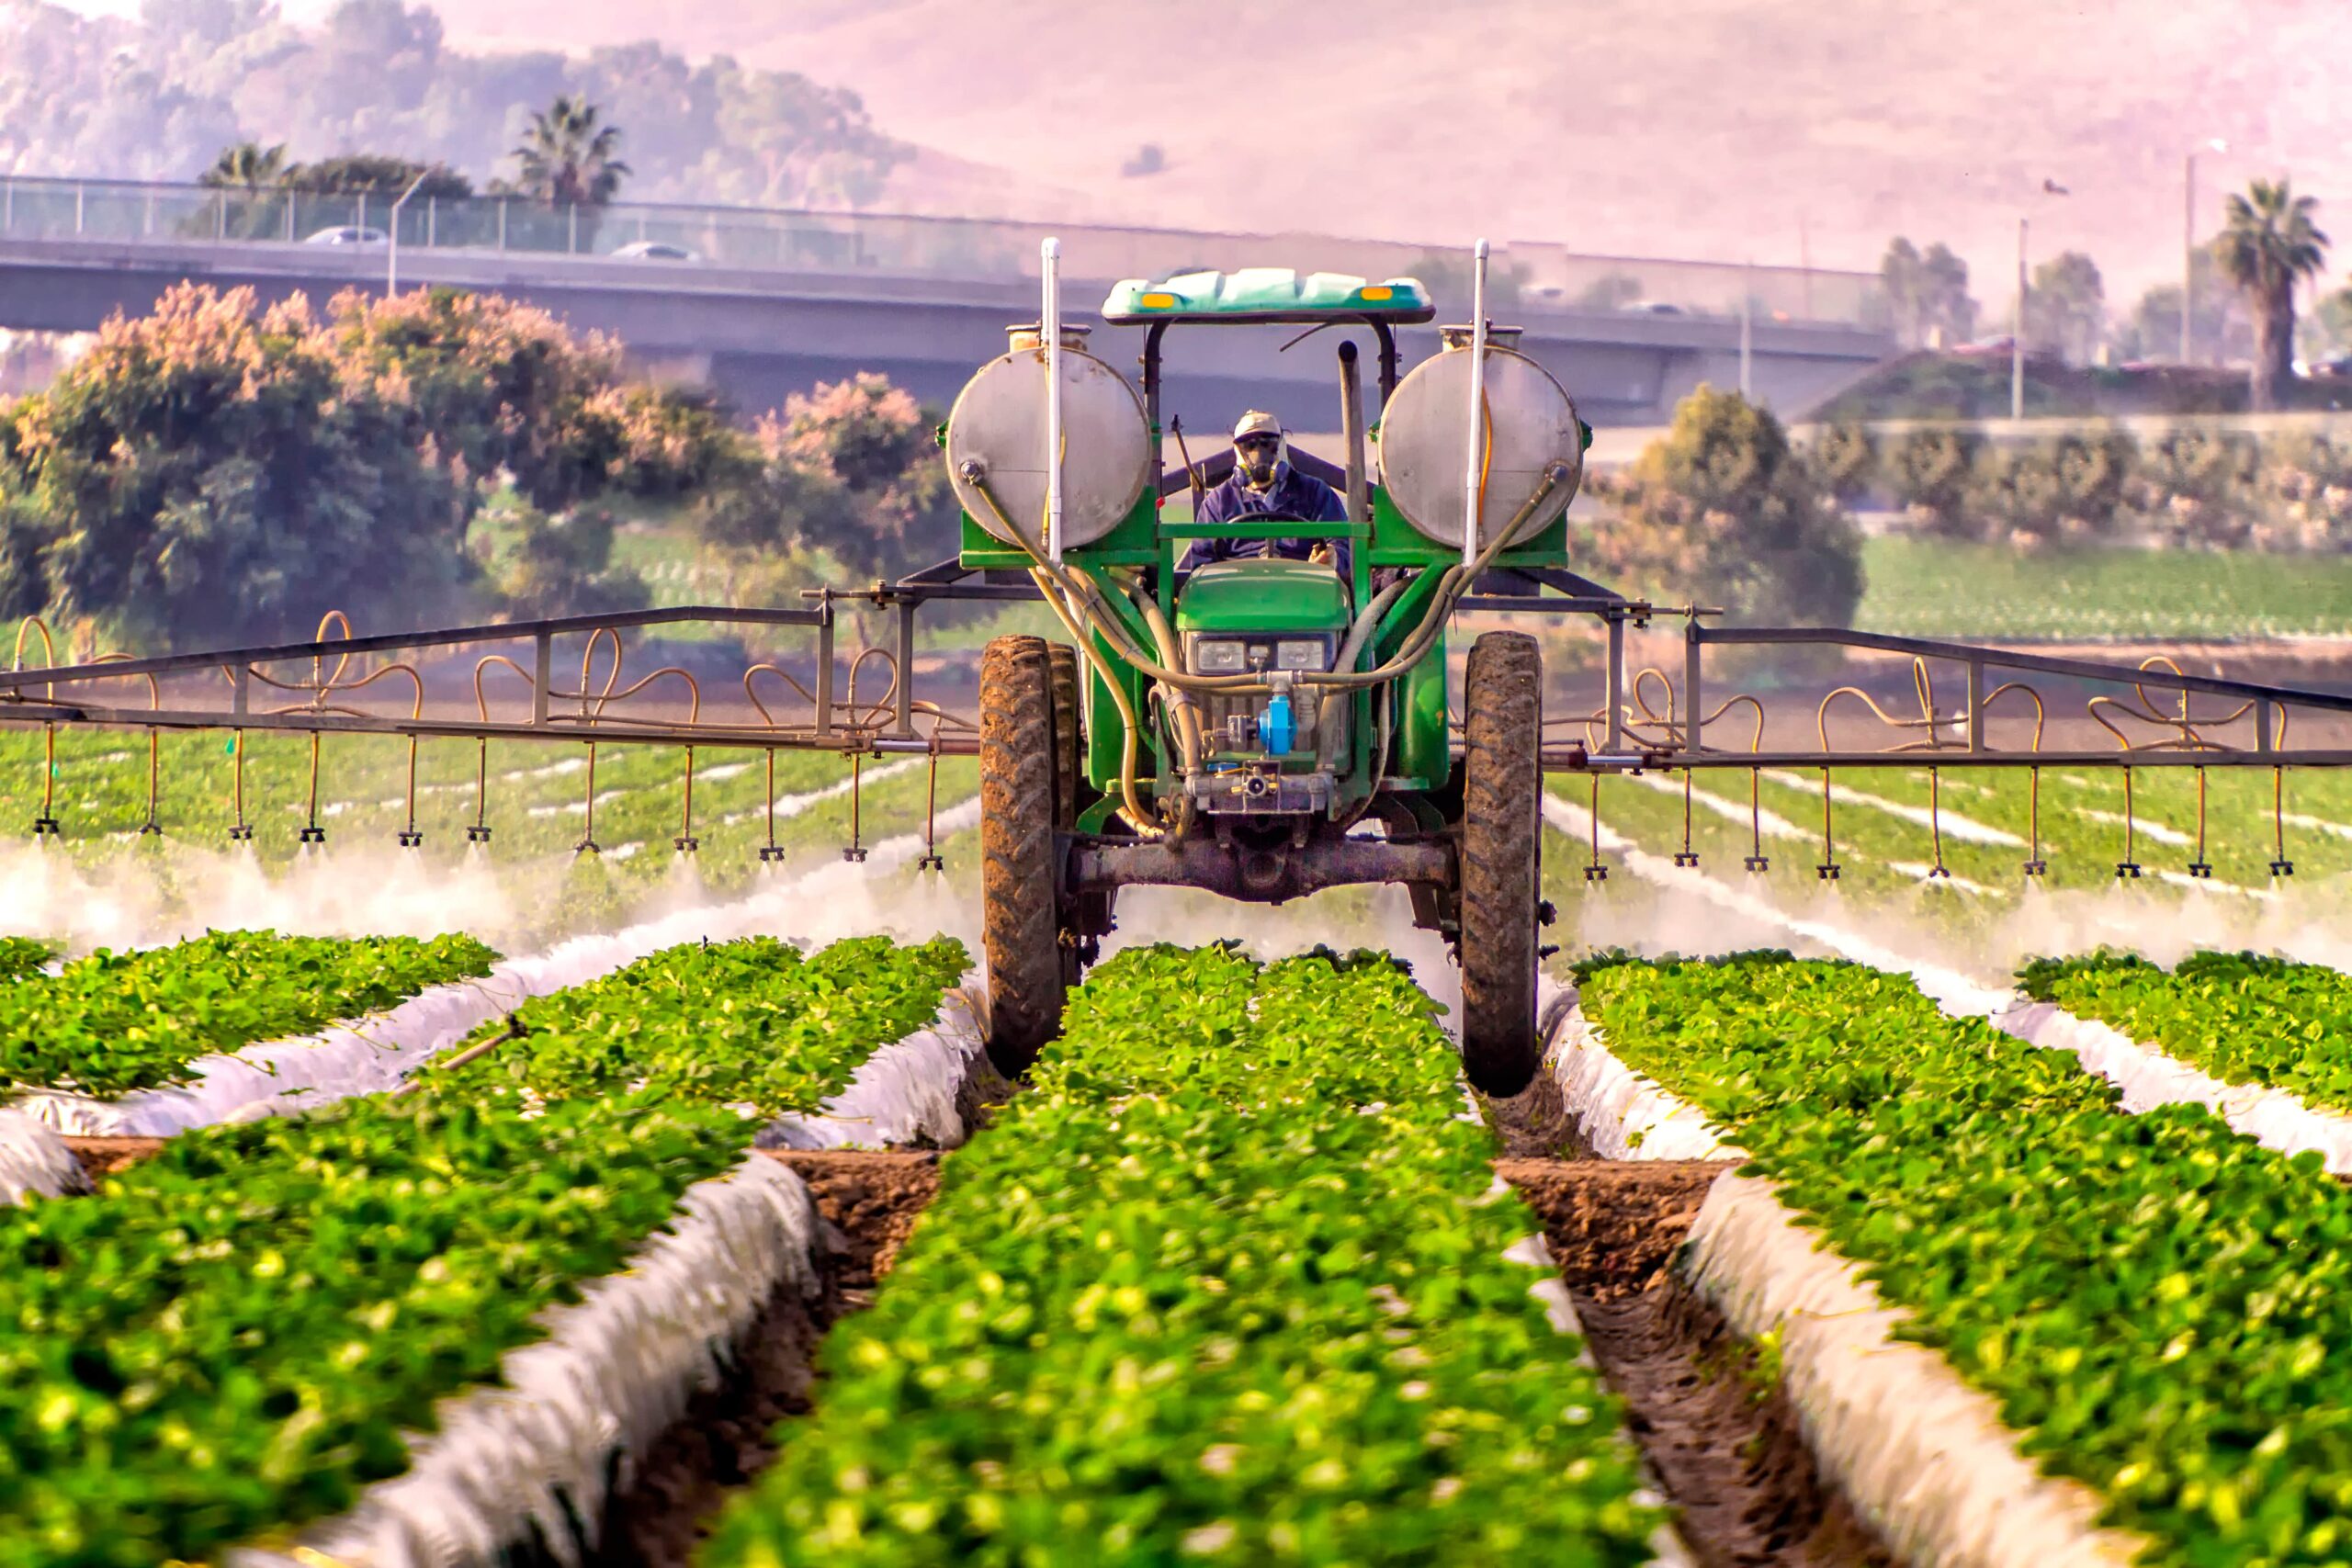 10 Pesticides & Herbicides Banned By Other Countries But Still Used In The U.S.